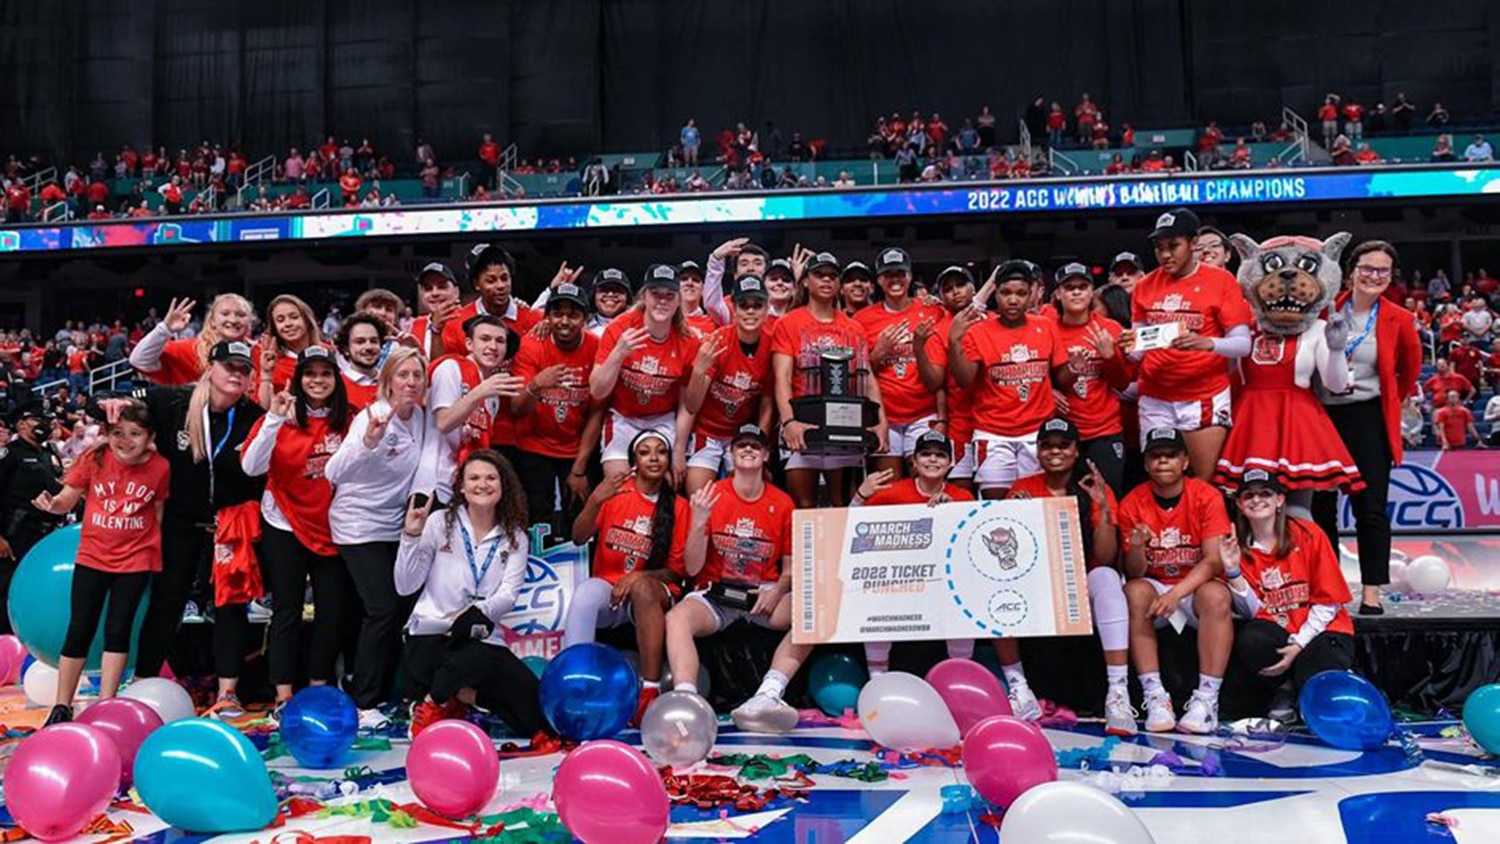 NC State women's basketball team poses together after winning the 2022 ACC Championship